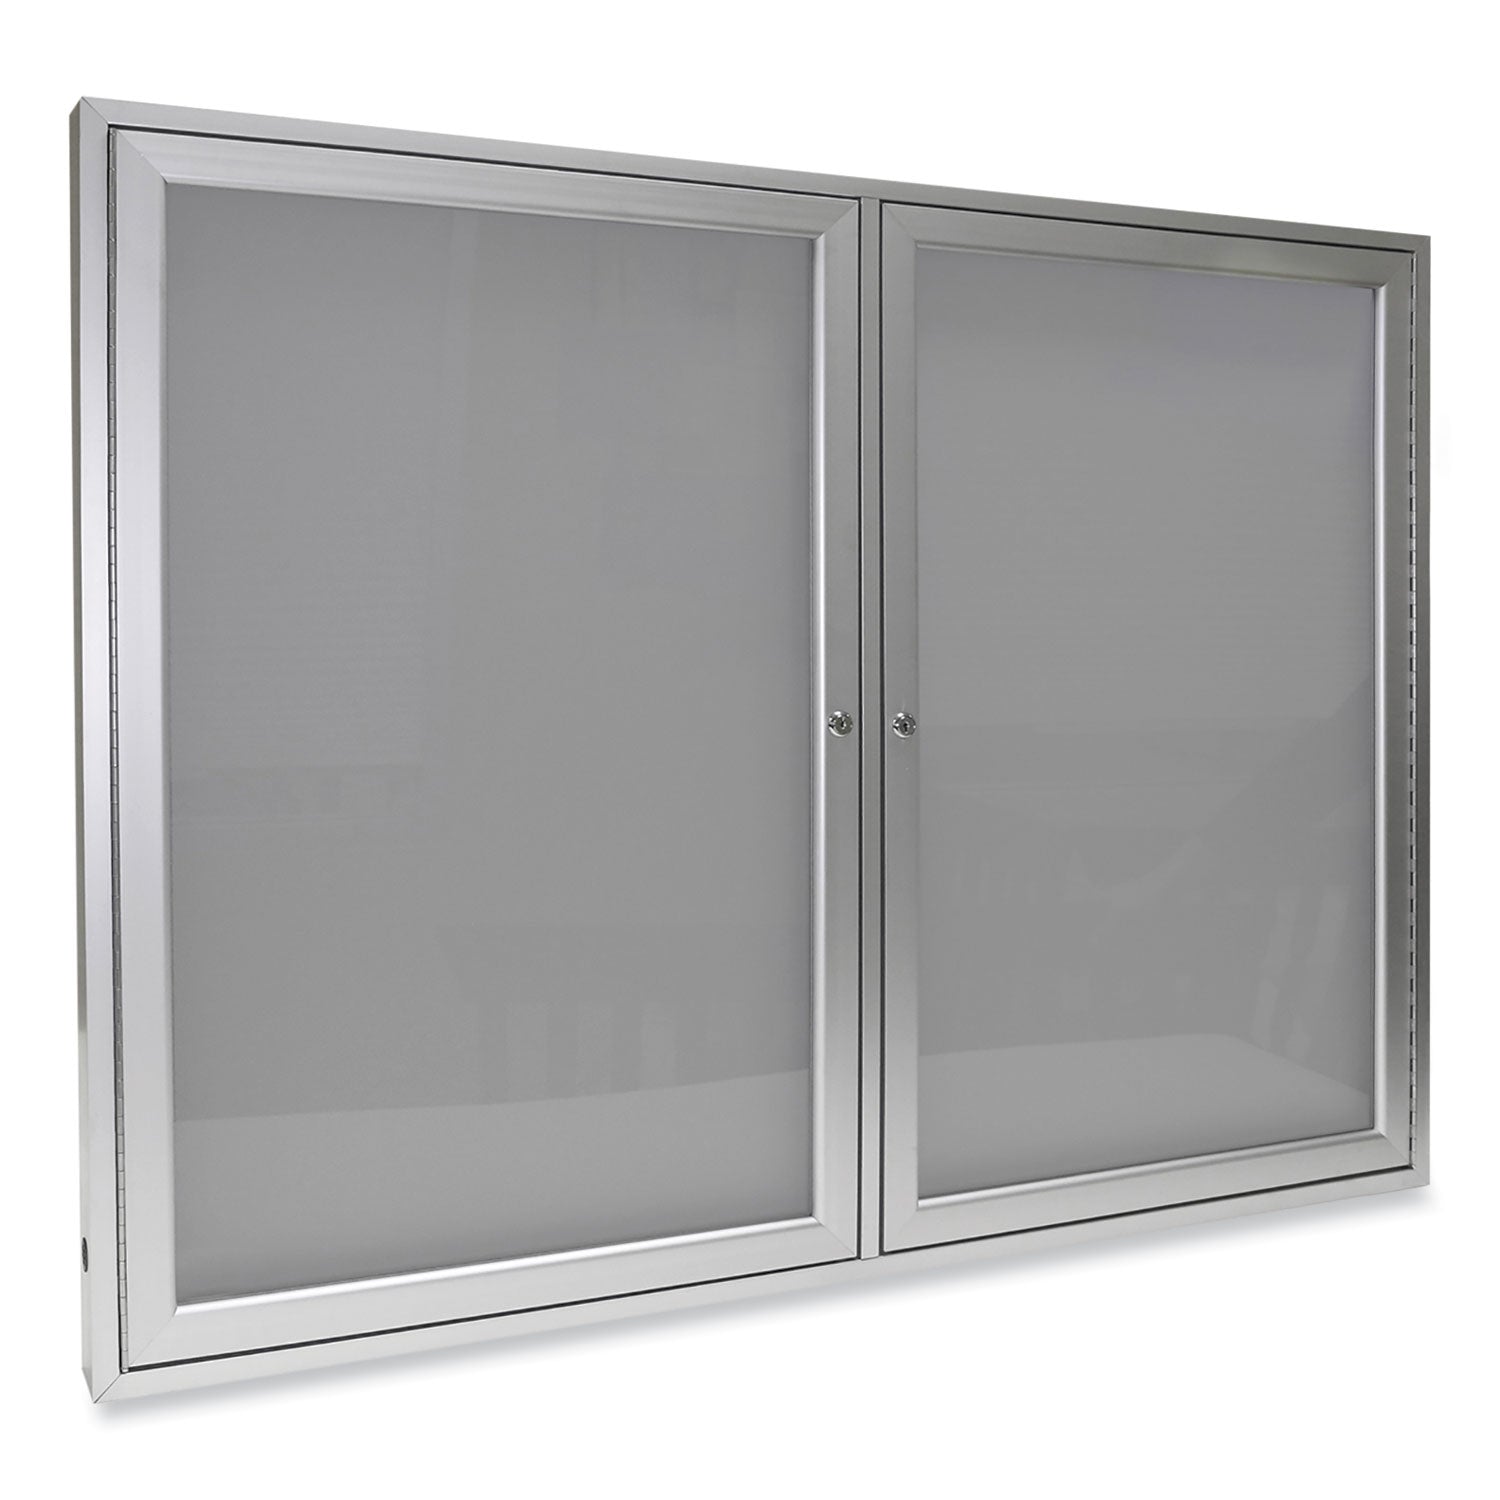 2-door-enclosed-vinyl-bulletin-board-with-satin-aluminum-frame-48-x-36-silver-surface-ships-in-7-10-business-days_ghepa23648vx193 - 1